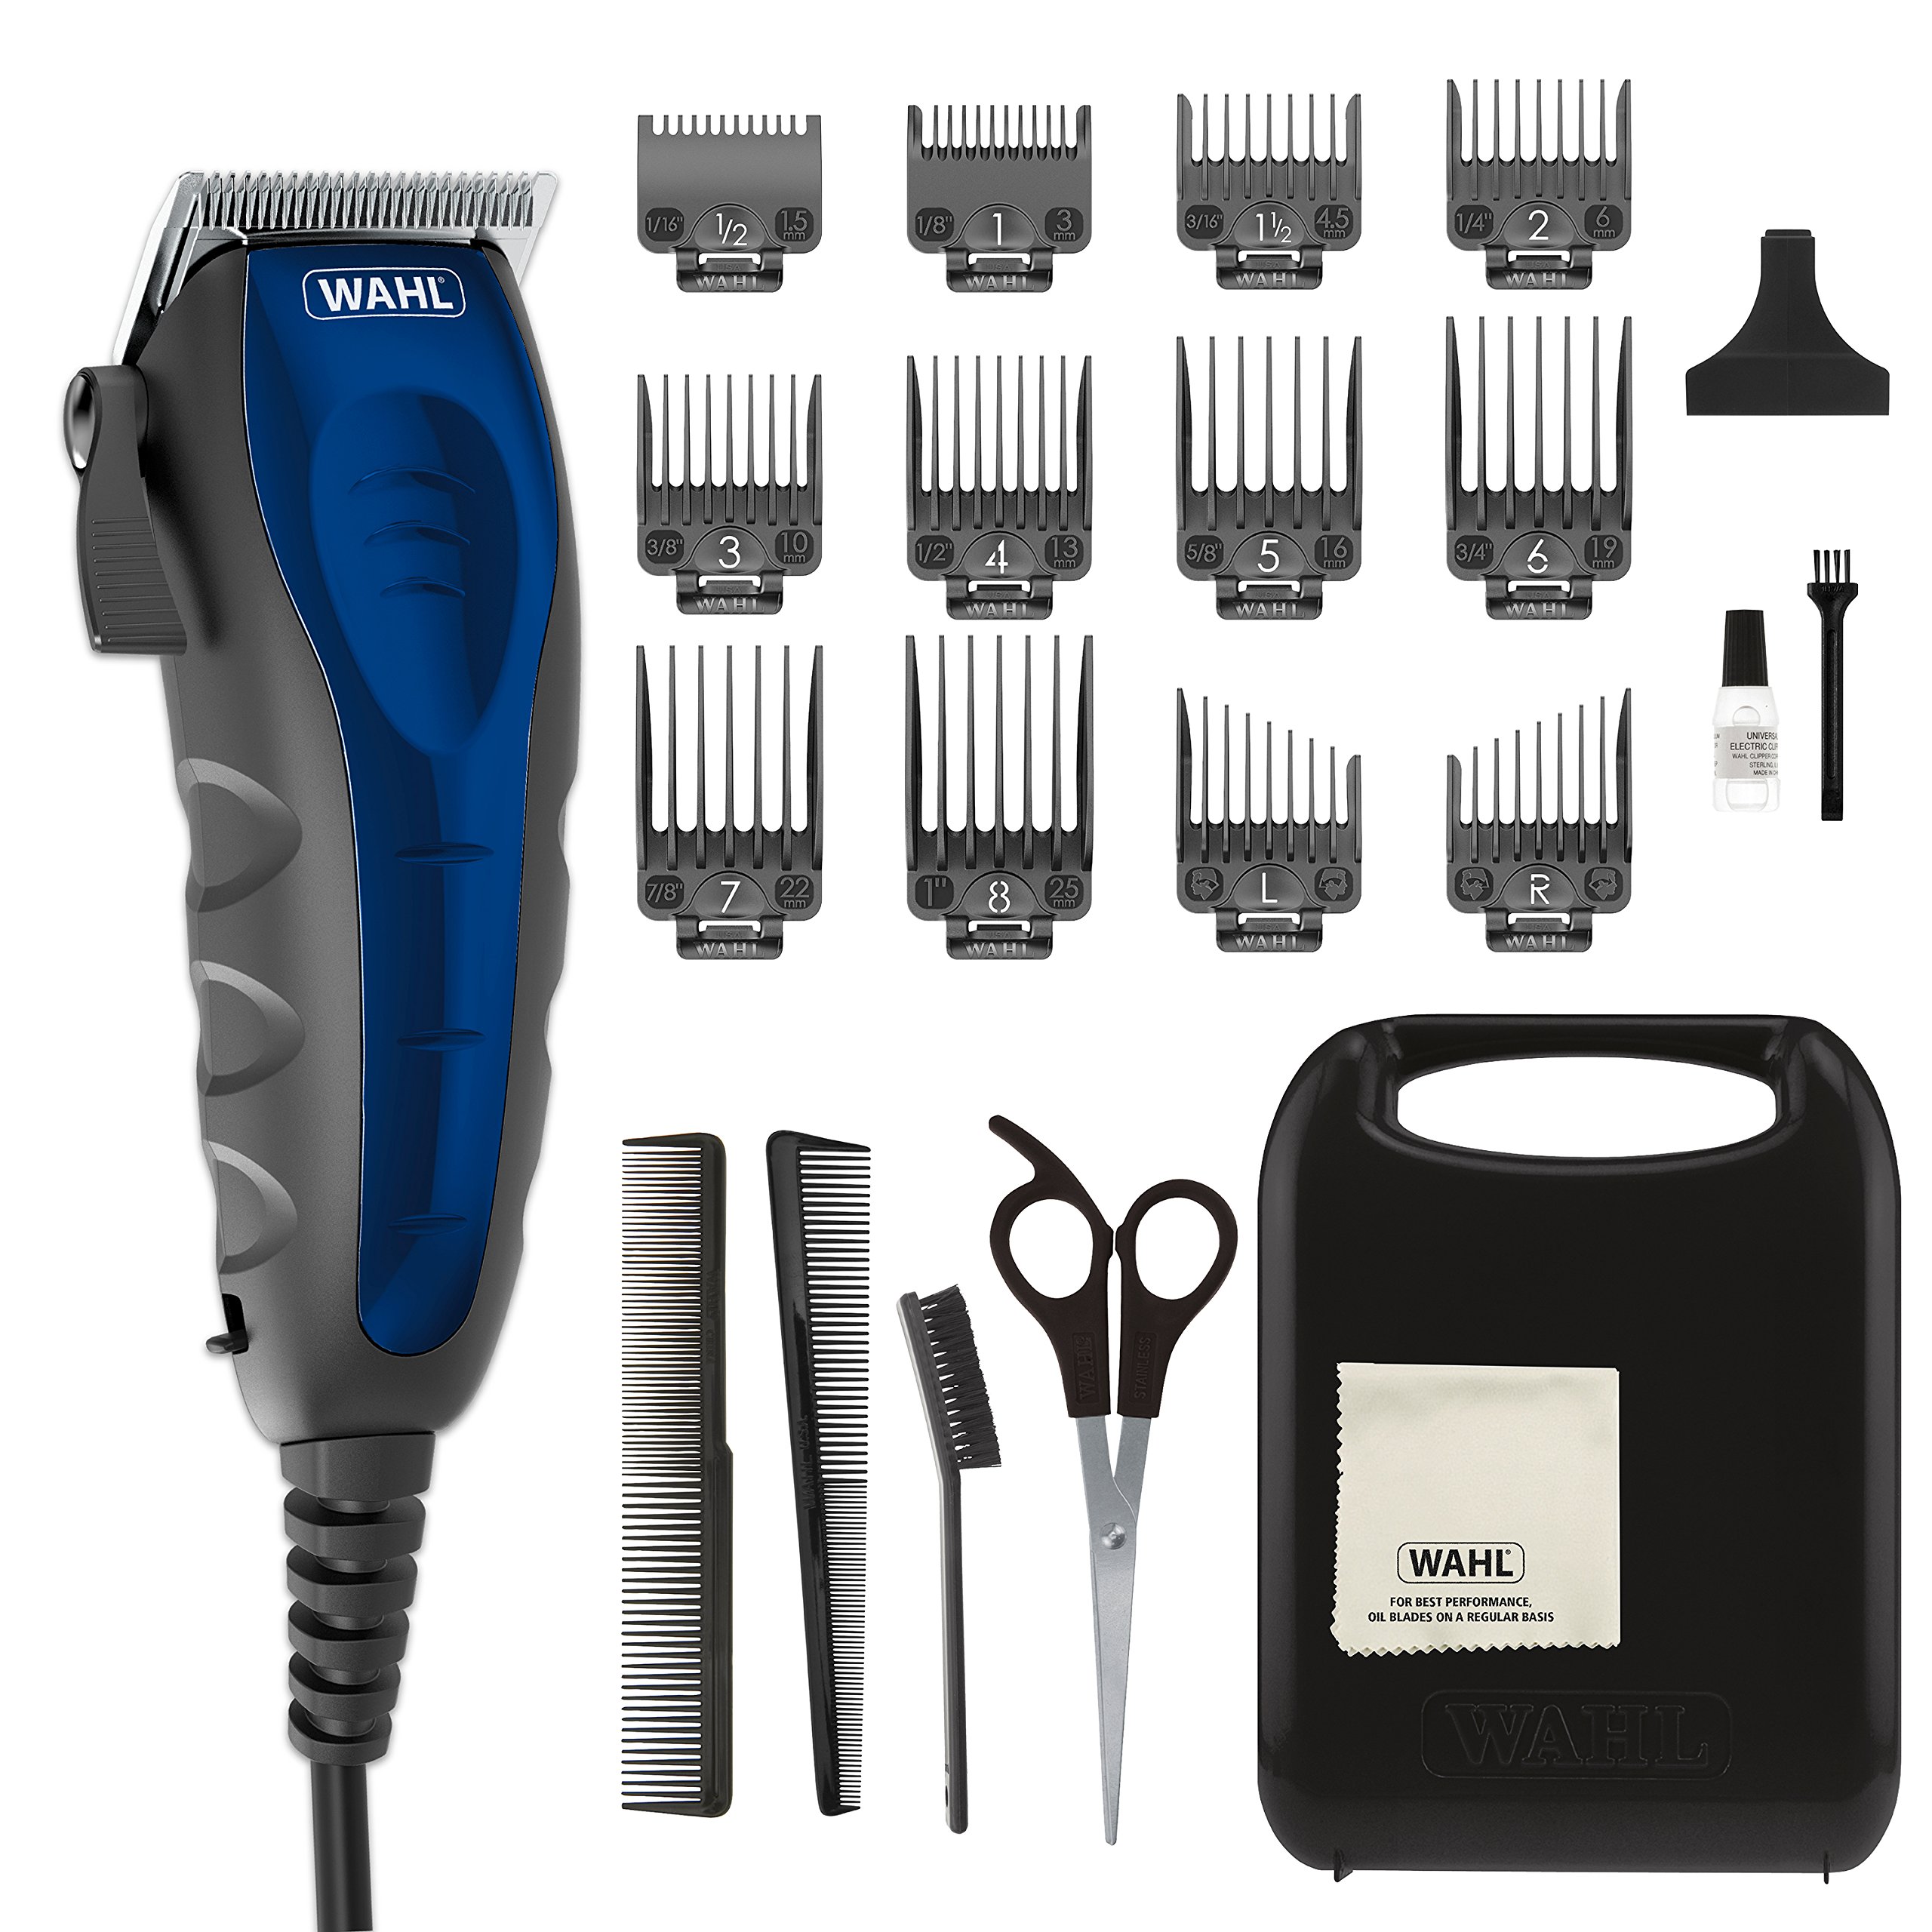 Wahl USA Self Cut Compact Corded Clipper Personal Haircutting Kit with Adjustable Taper Lever, and 12 Hair Clipper Guards for Cl